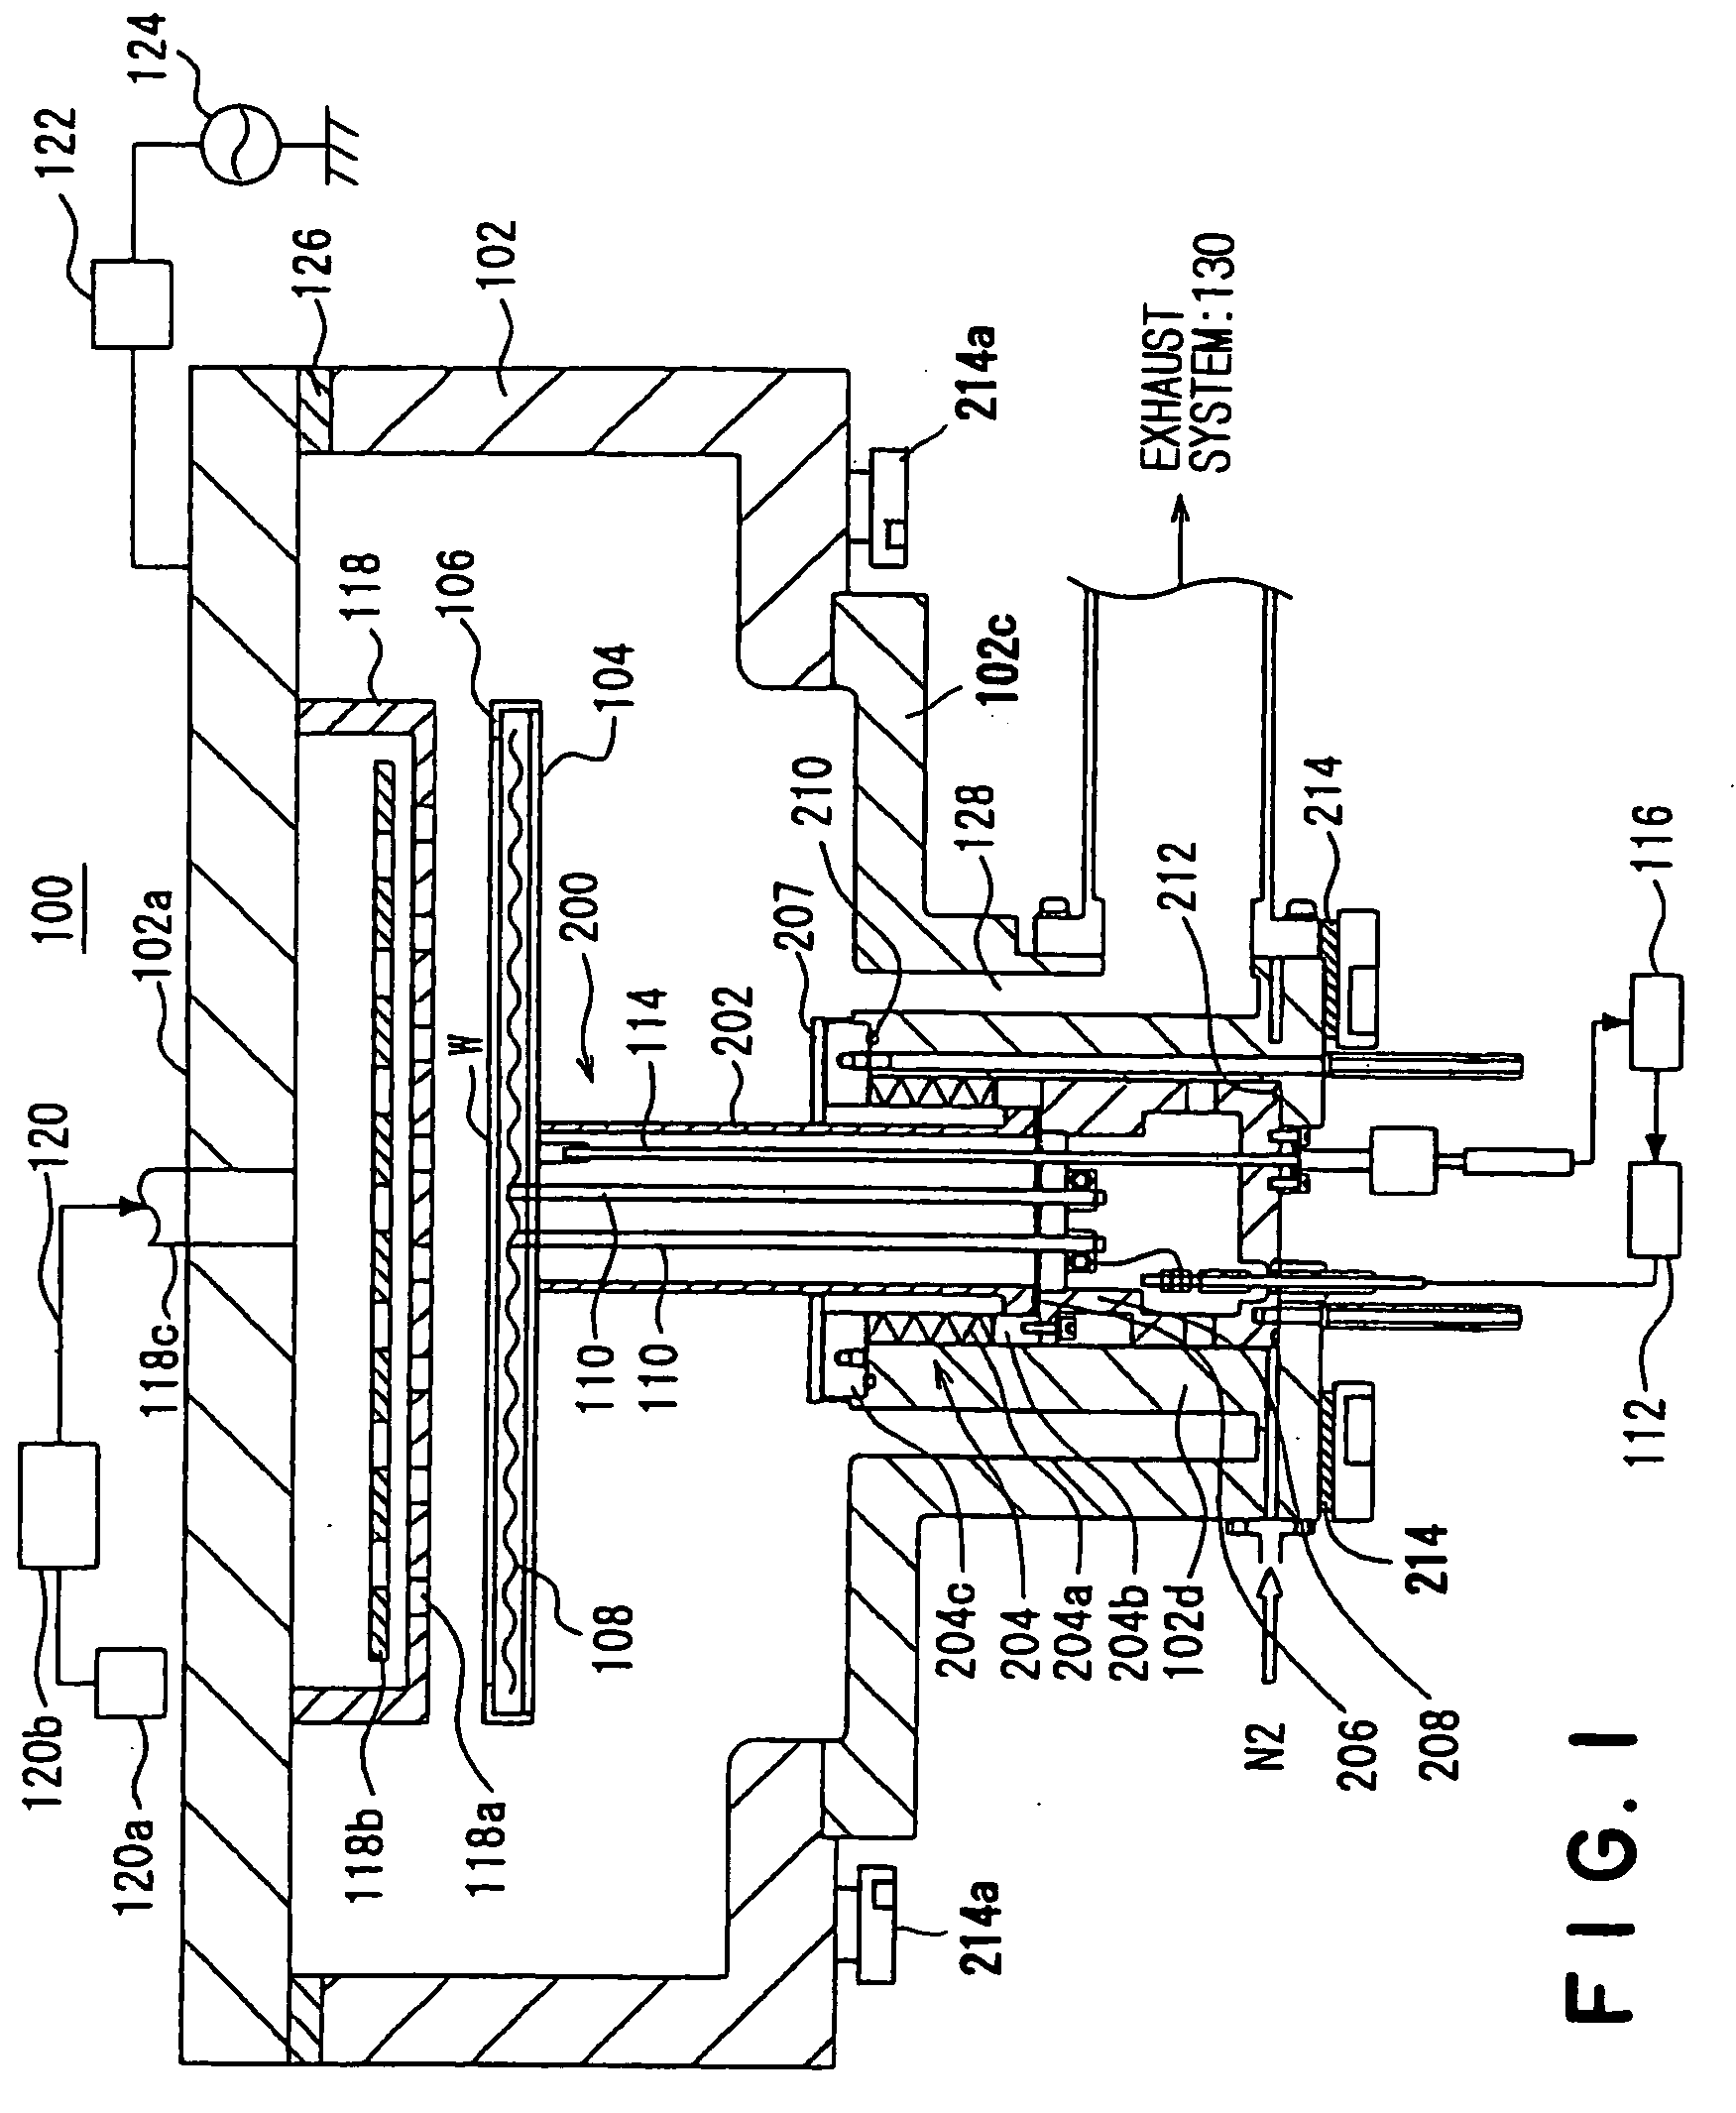 Substrate heating device and method of purging the device